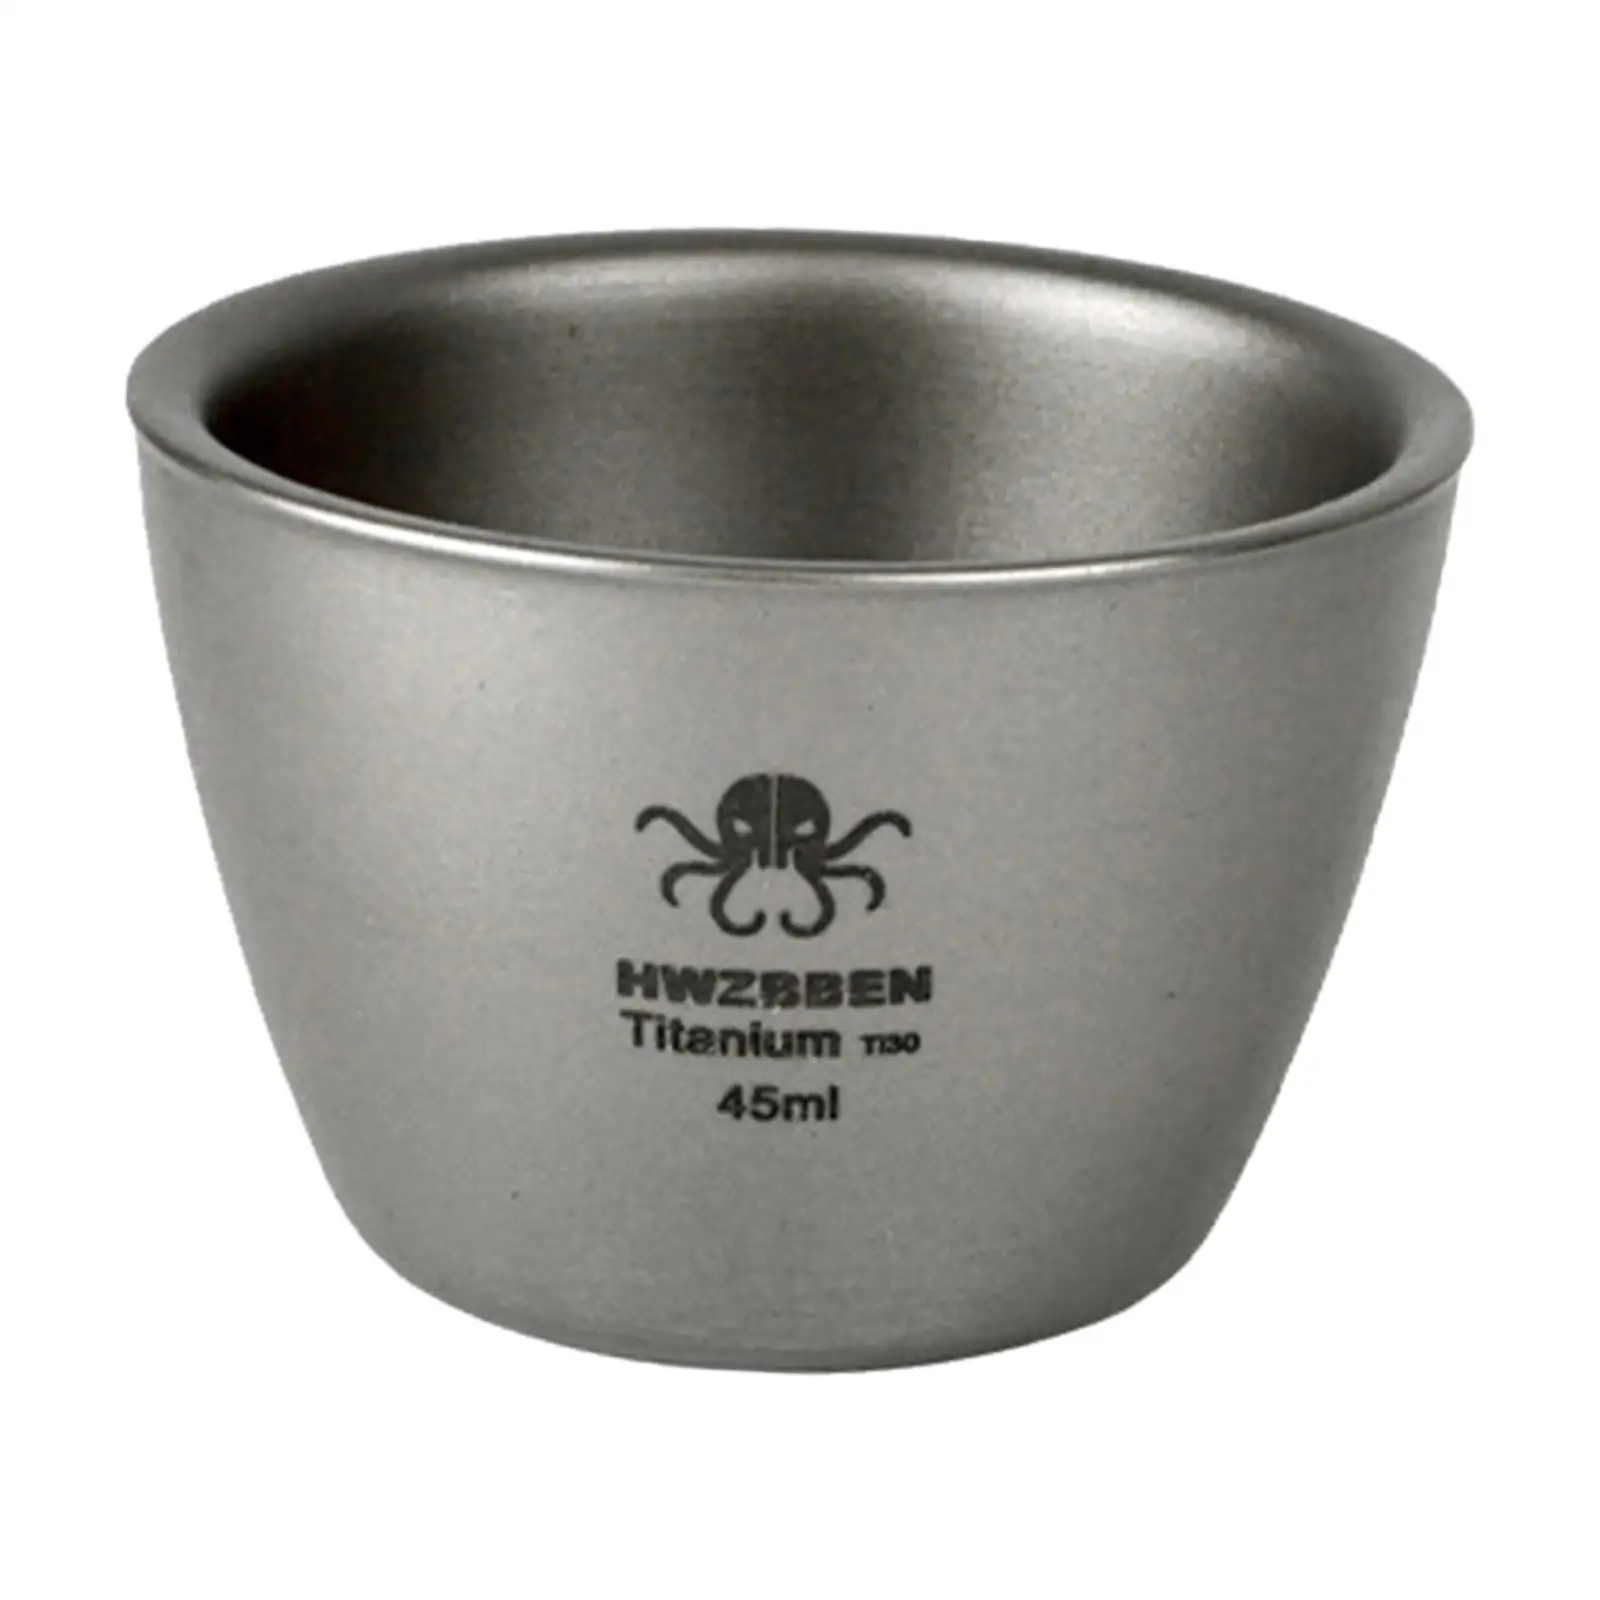 Mini Titanium Cup  Liquor Cup Coffee Cups Beer Cup Mug Heat Resistant Cookware Titanium for  Daily Use Hiking Water